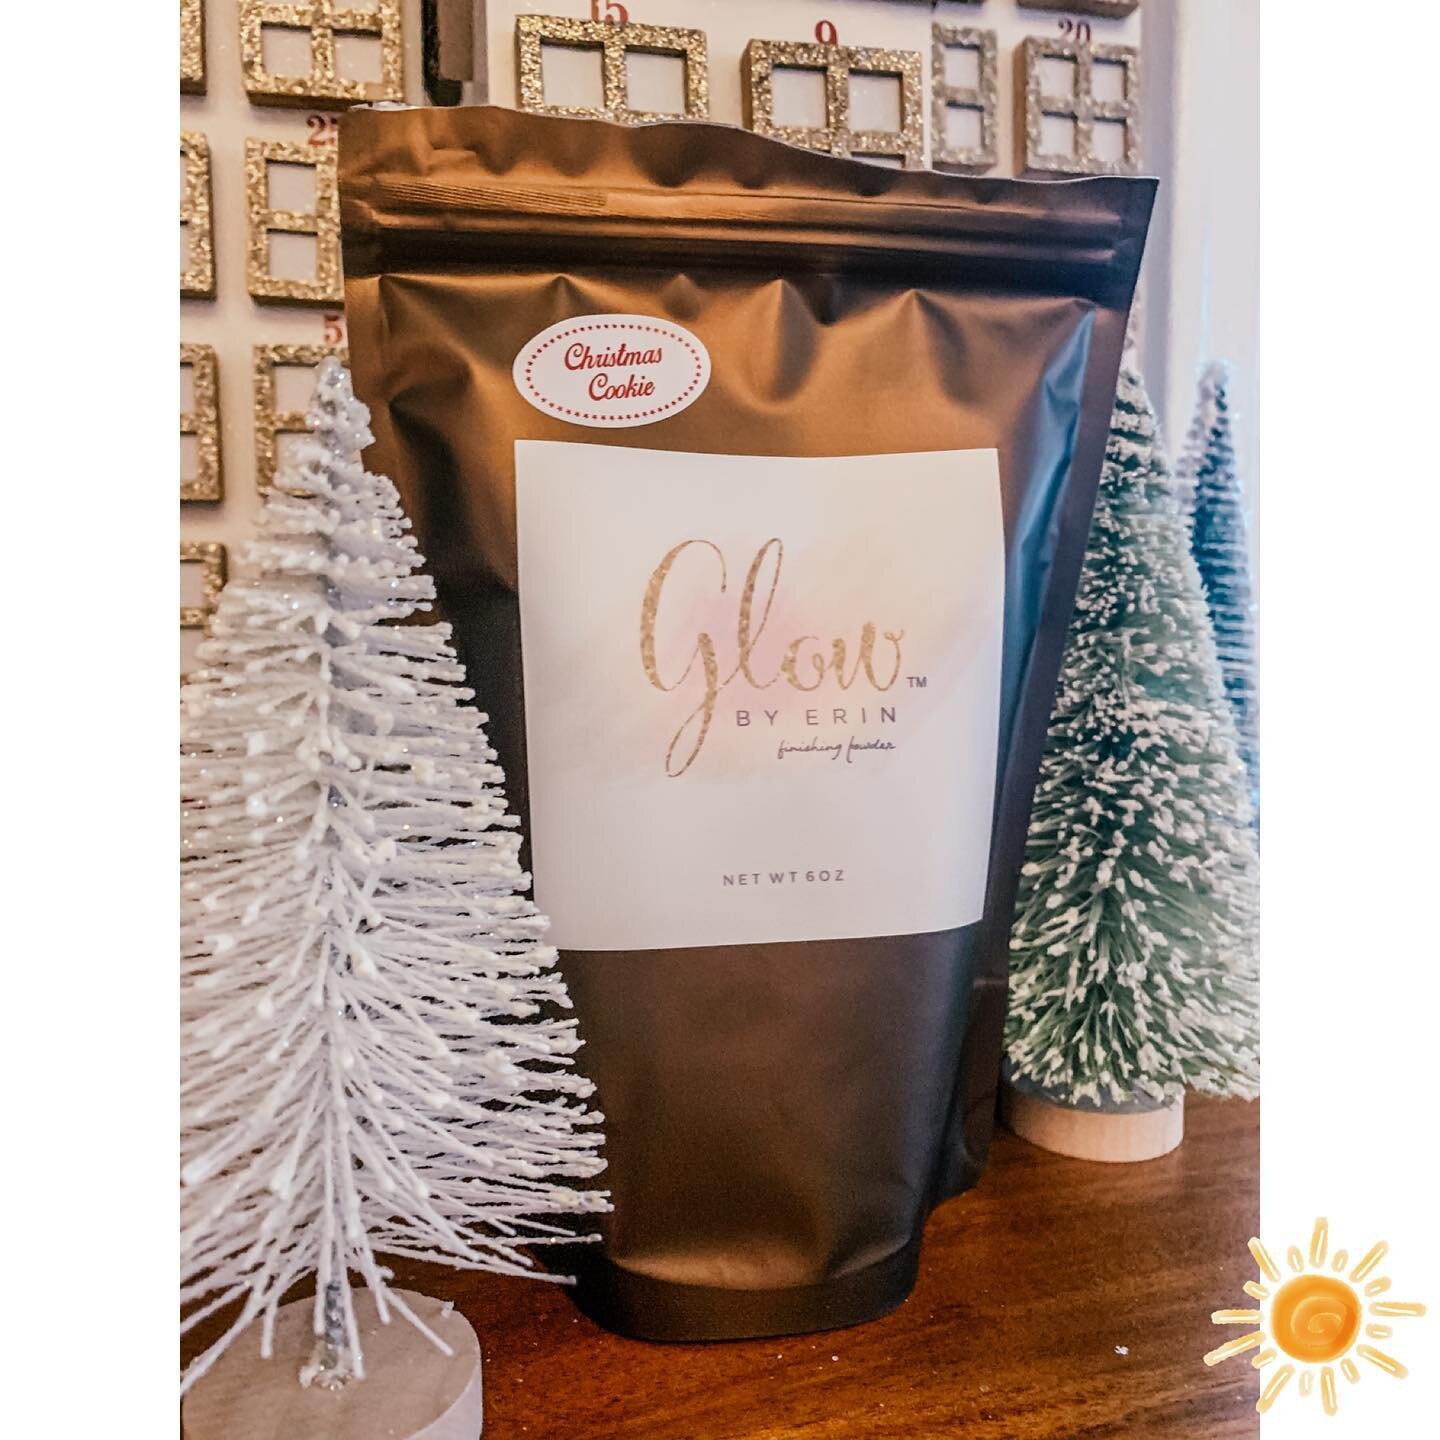 Just in time for the holidays!!! This Christmas Cookie scent is to die for 😍 Glow by Erin is a natural and hypoallergenic drying powder that protects your tan as it develops and hydrates to extend the longevity of your tan! Your skin will feel soft 